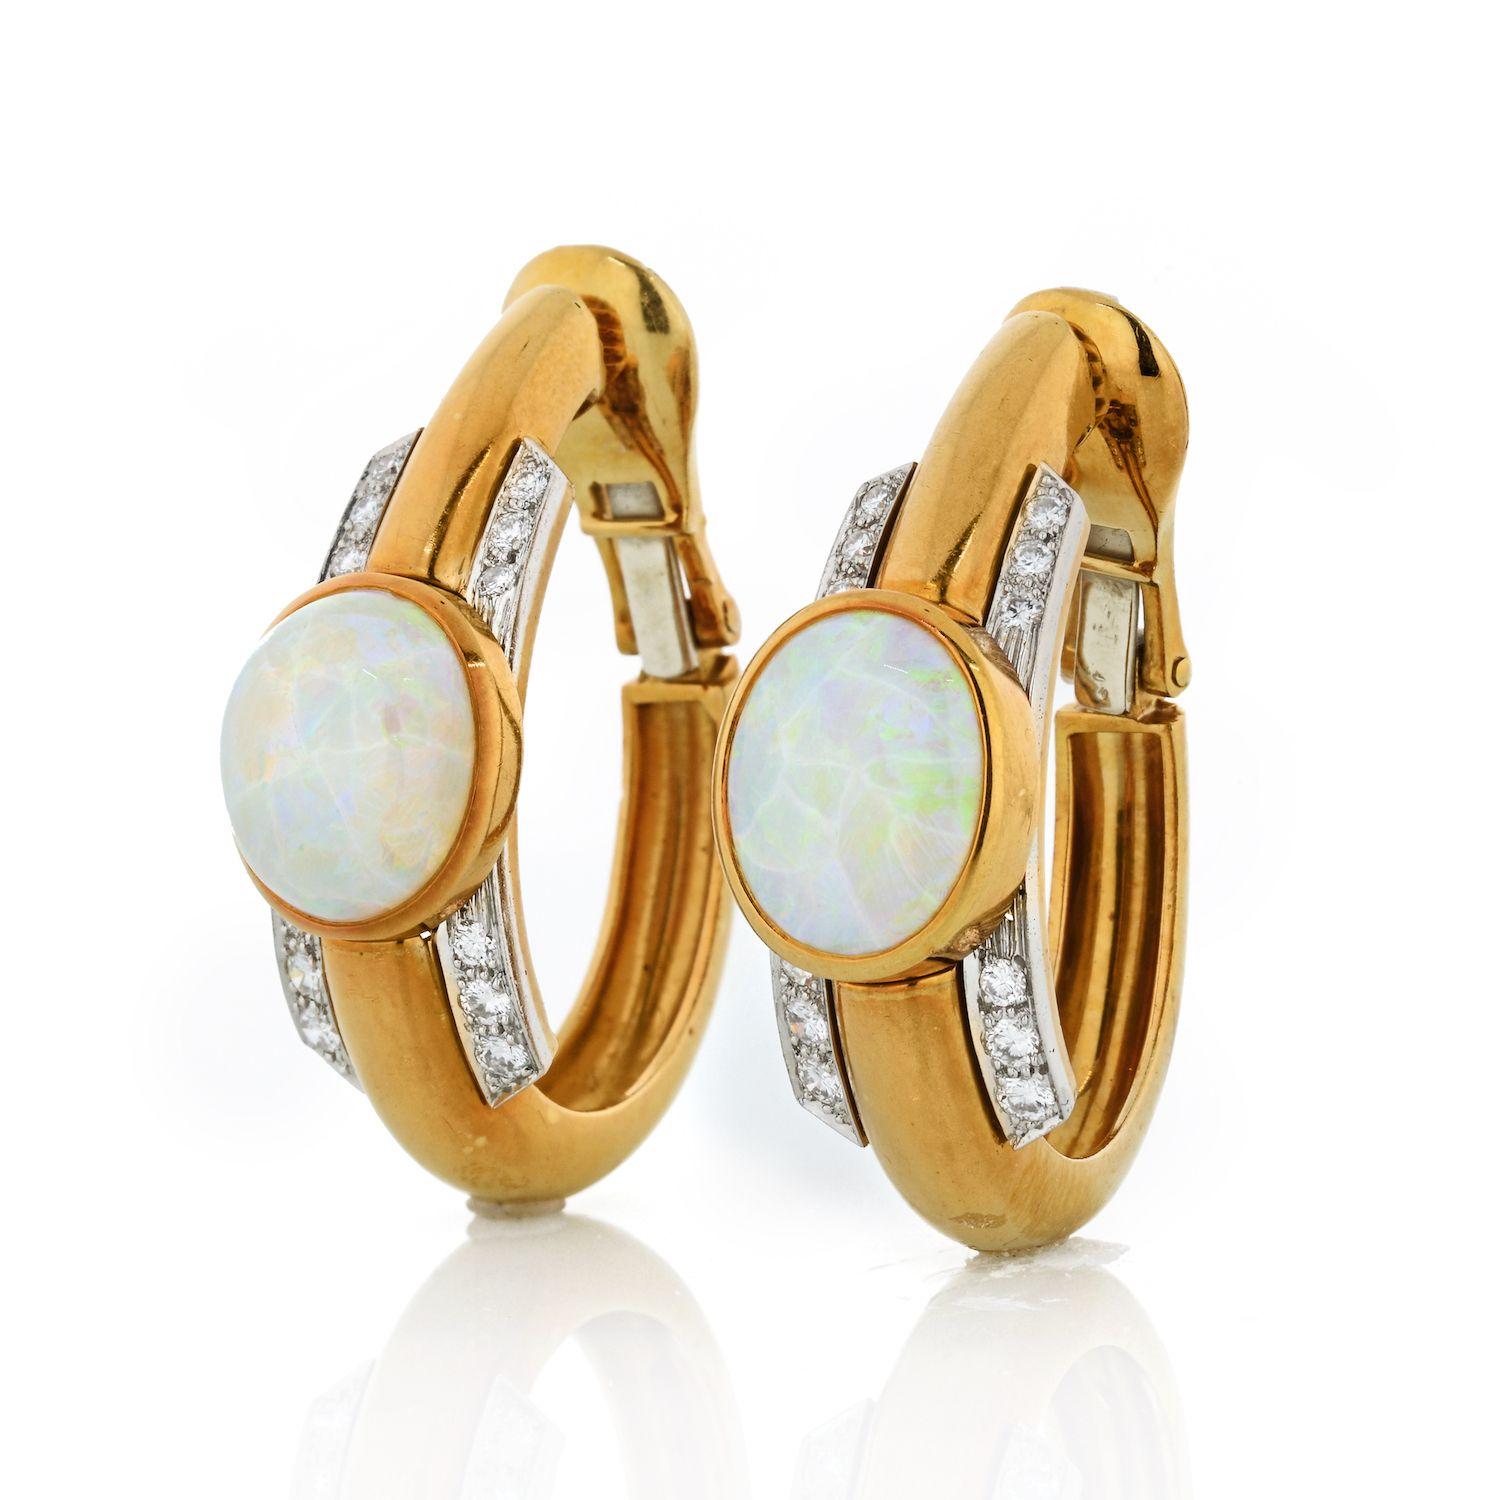 A true embodiment of the imaginative and visionary aesthetic of the brand, this David Webb statement piece stuns with bold shapes and exuberant color. This item features stunning opal cabochons and scintilating brilliant-cut diamonds. Clip-on